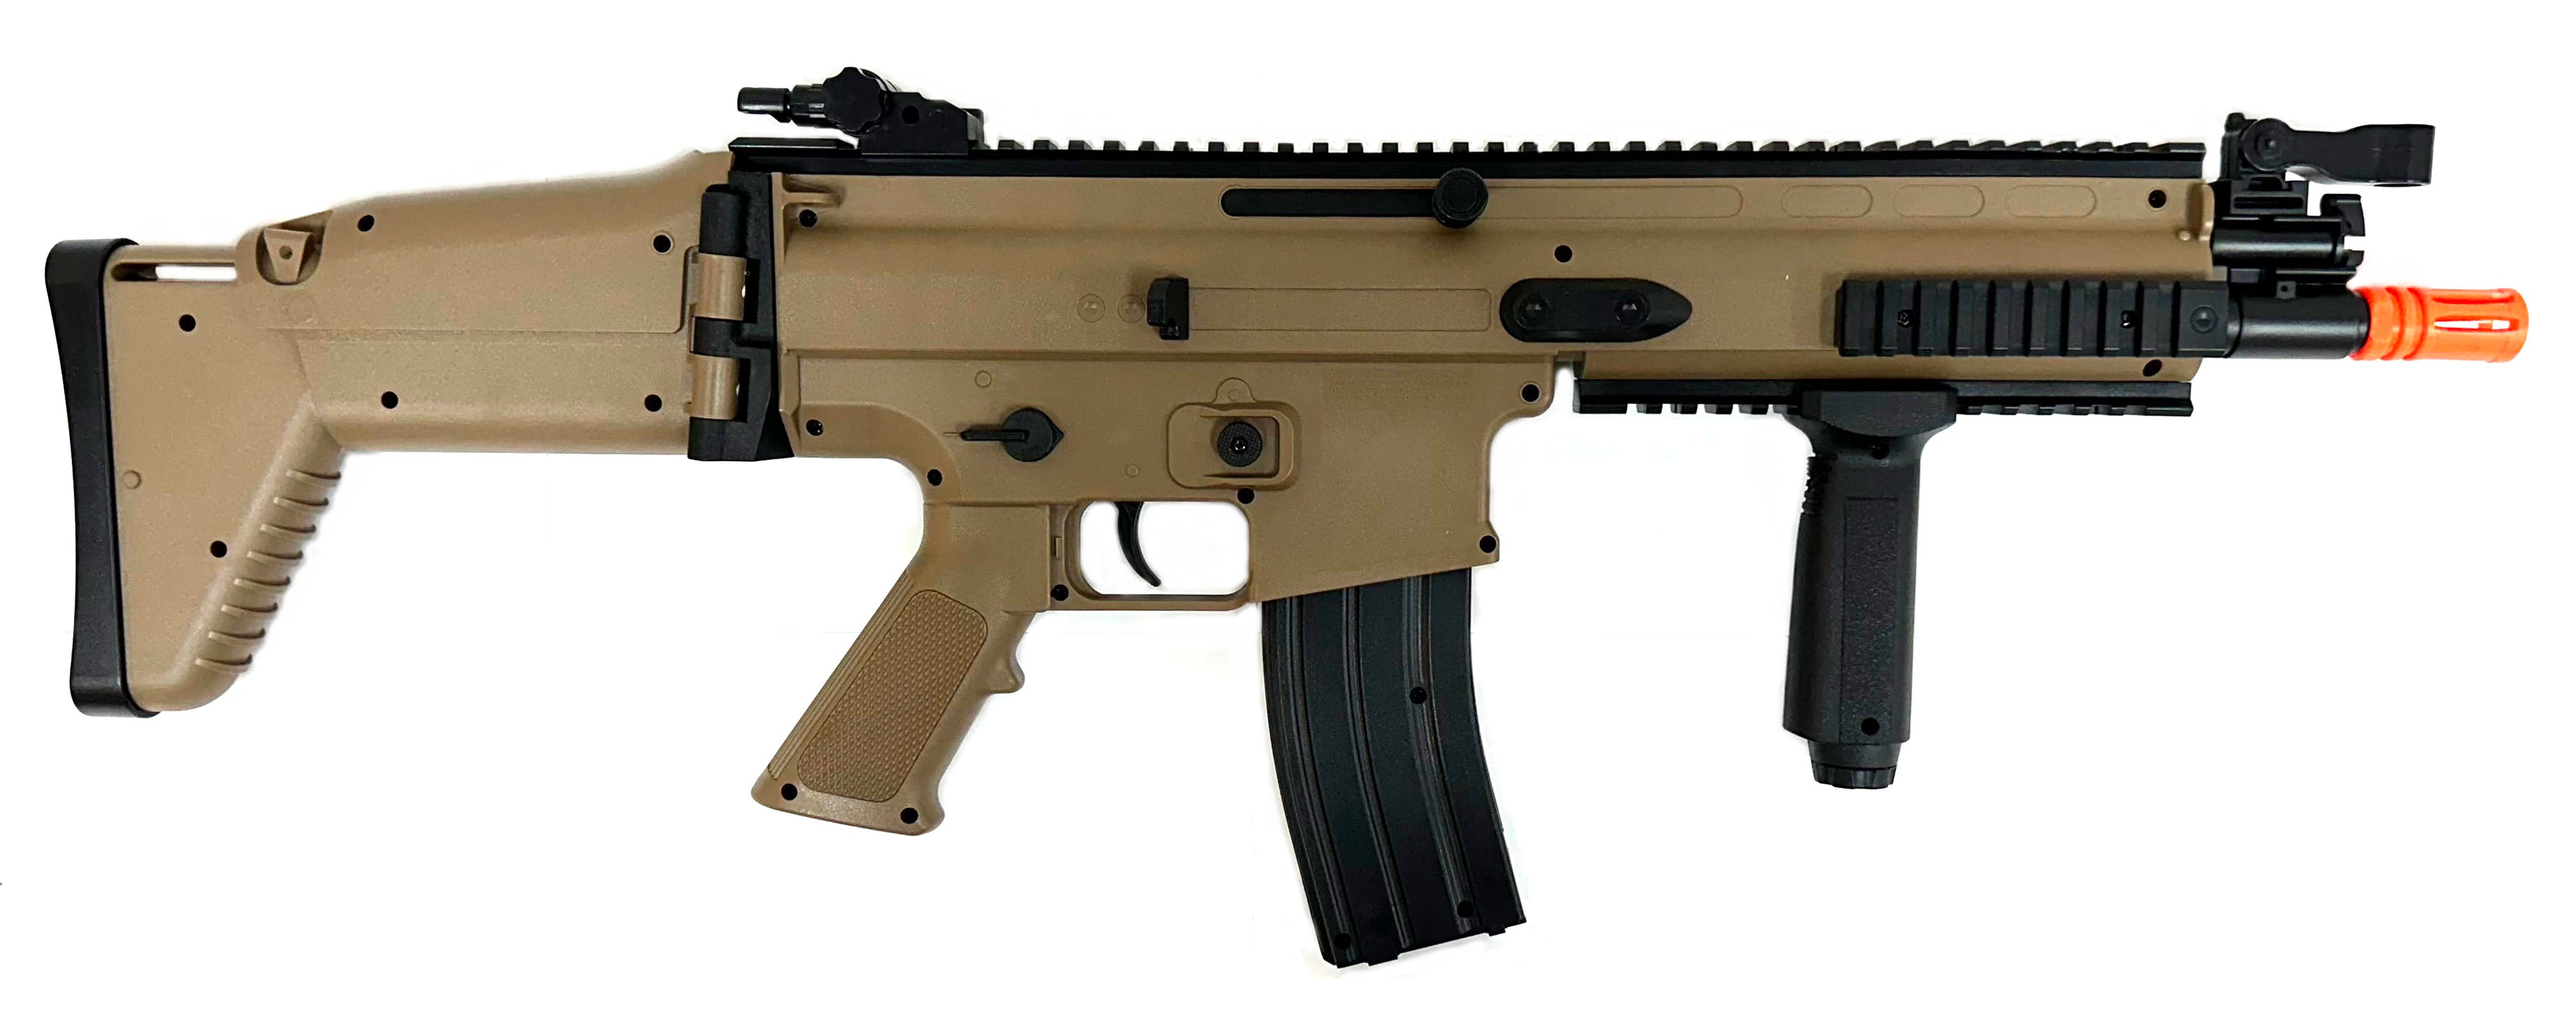 Cybergun SCAR-L Licensed Full Size Spring Powered Airsoft Rifle (Tan / Gun Only)